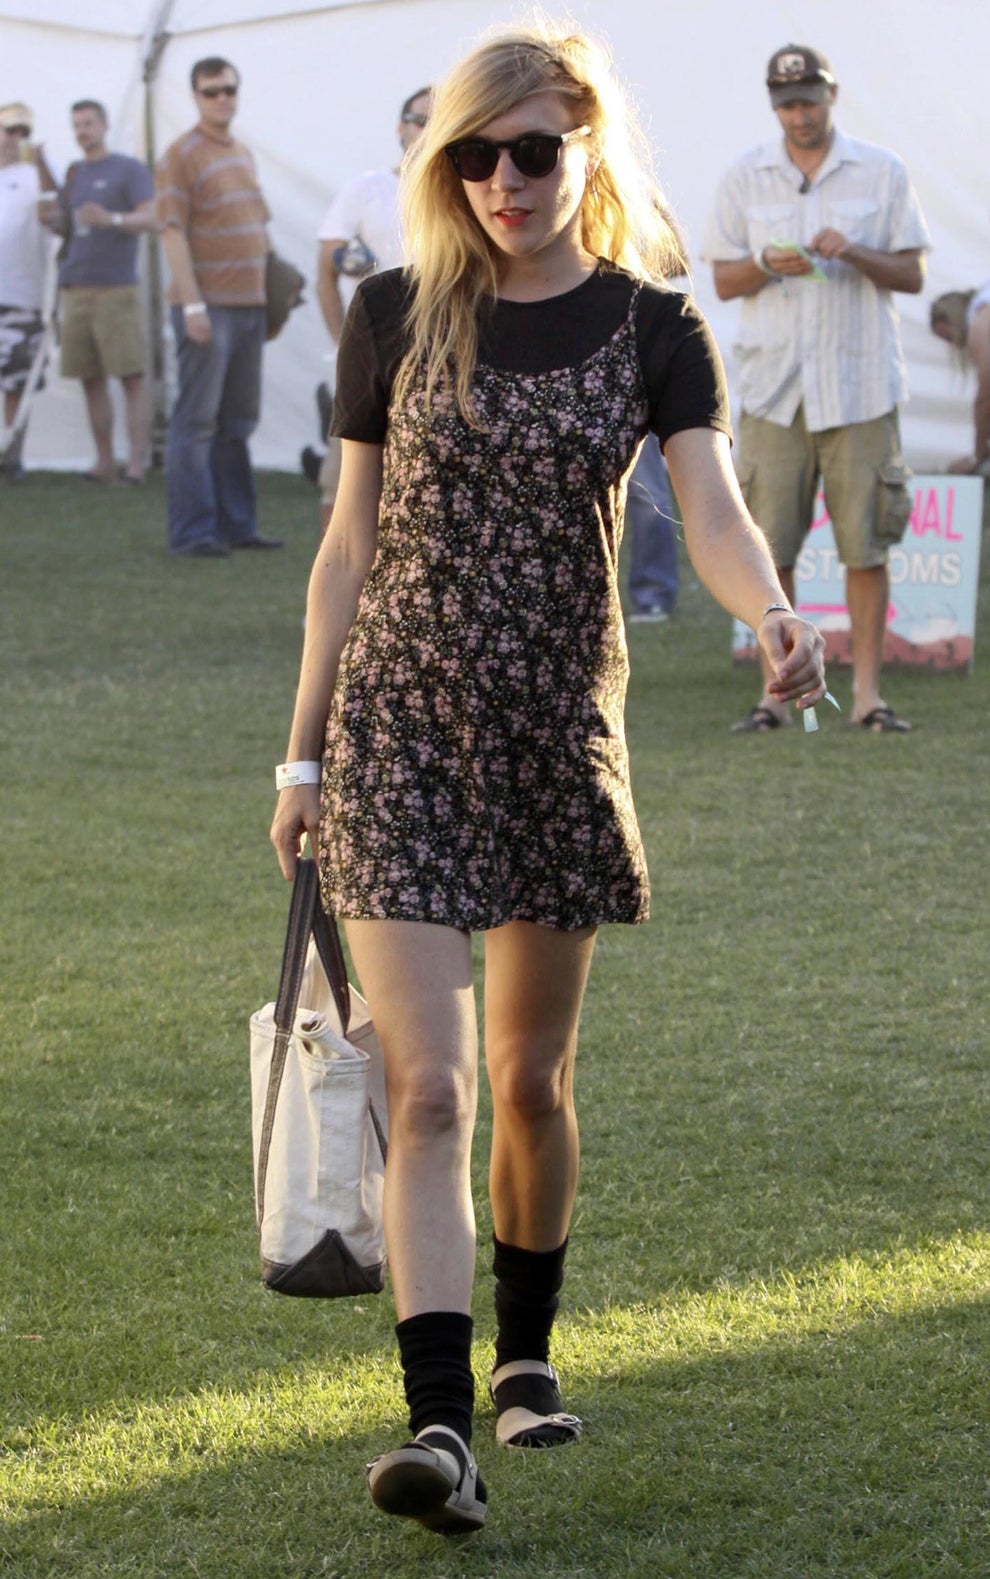 A Look Back At What People Were Wearing At Coachella 10 Years Ago